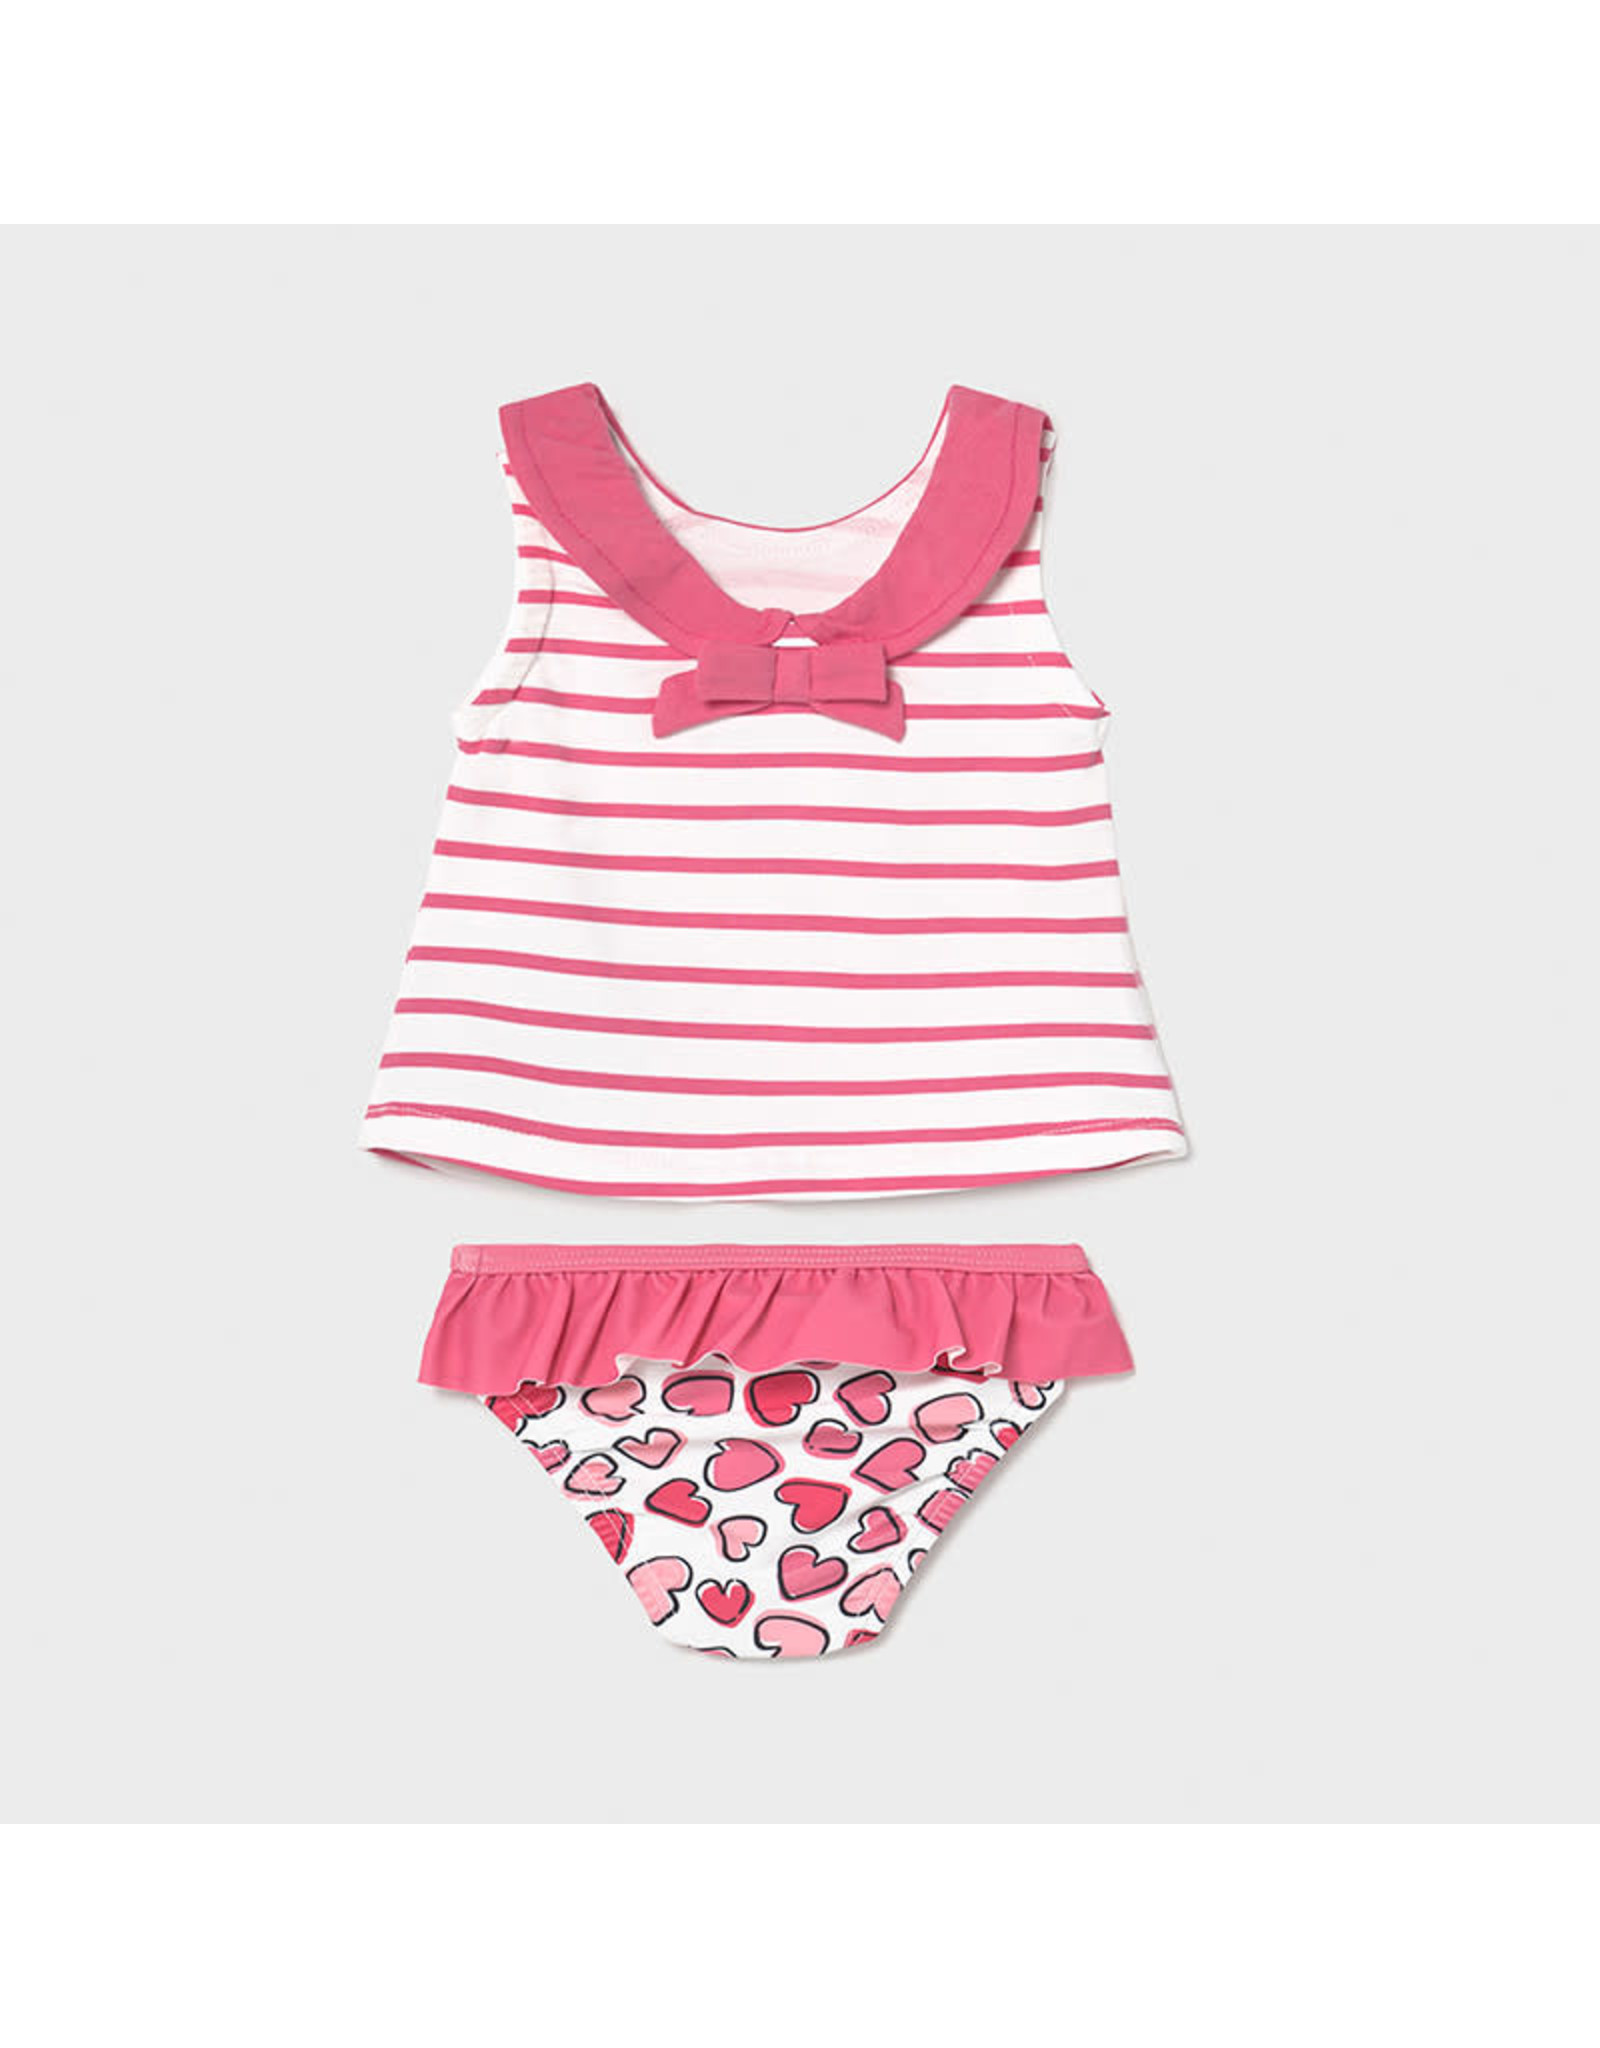 Mayoral Pink Bathsuit set with hat